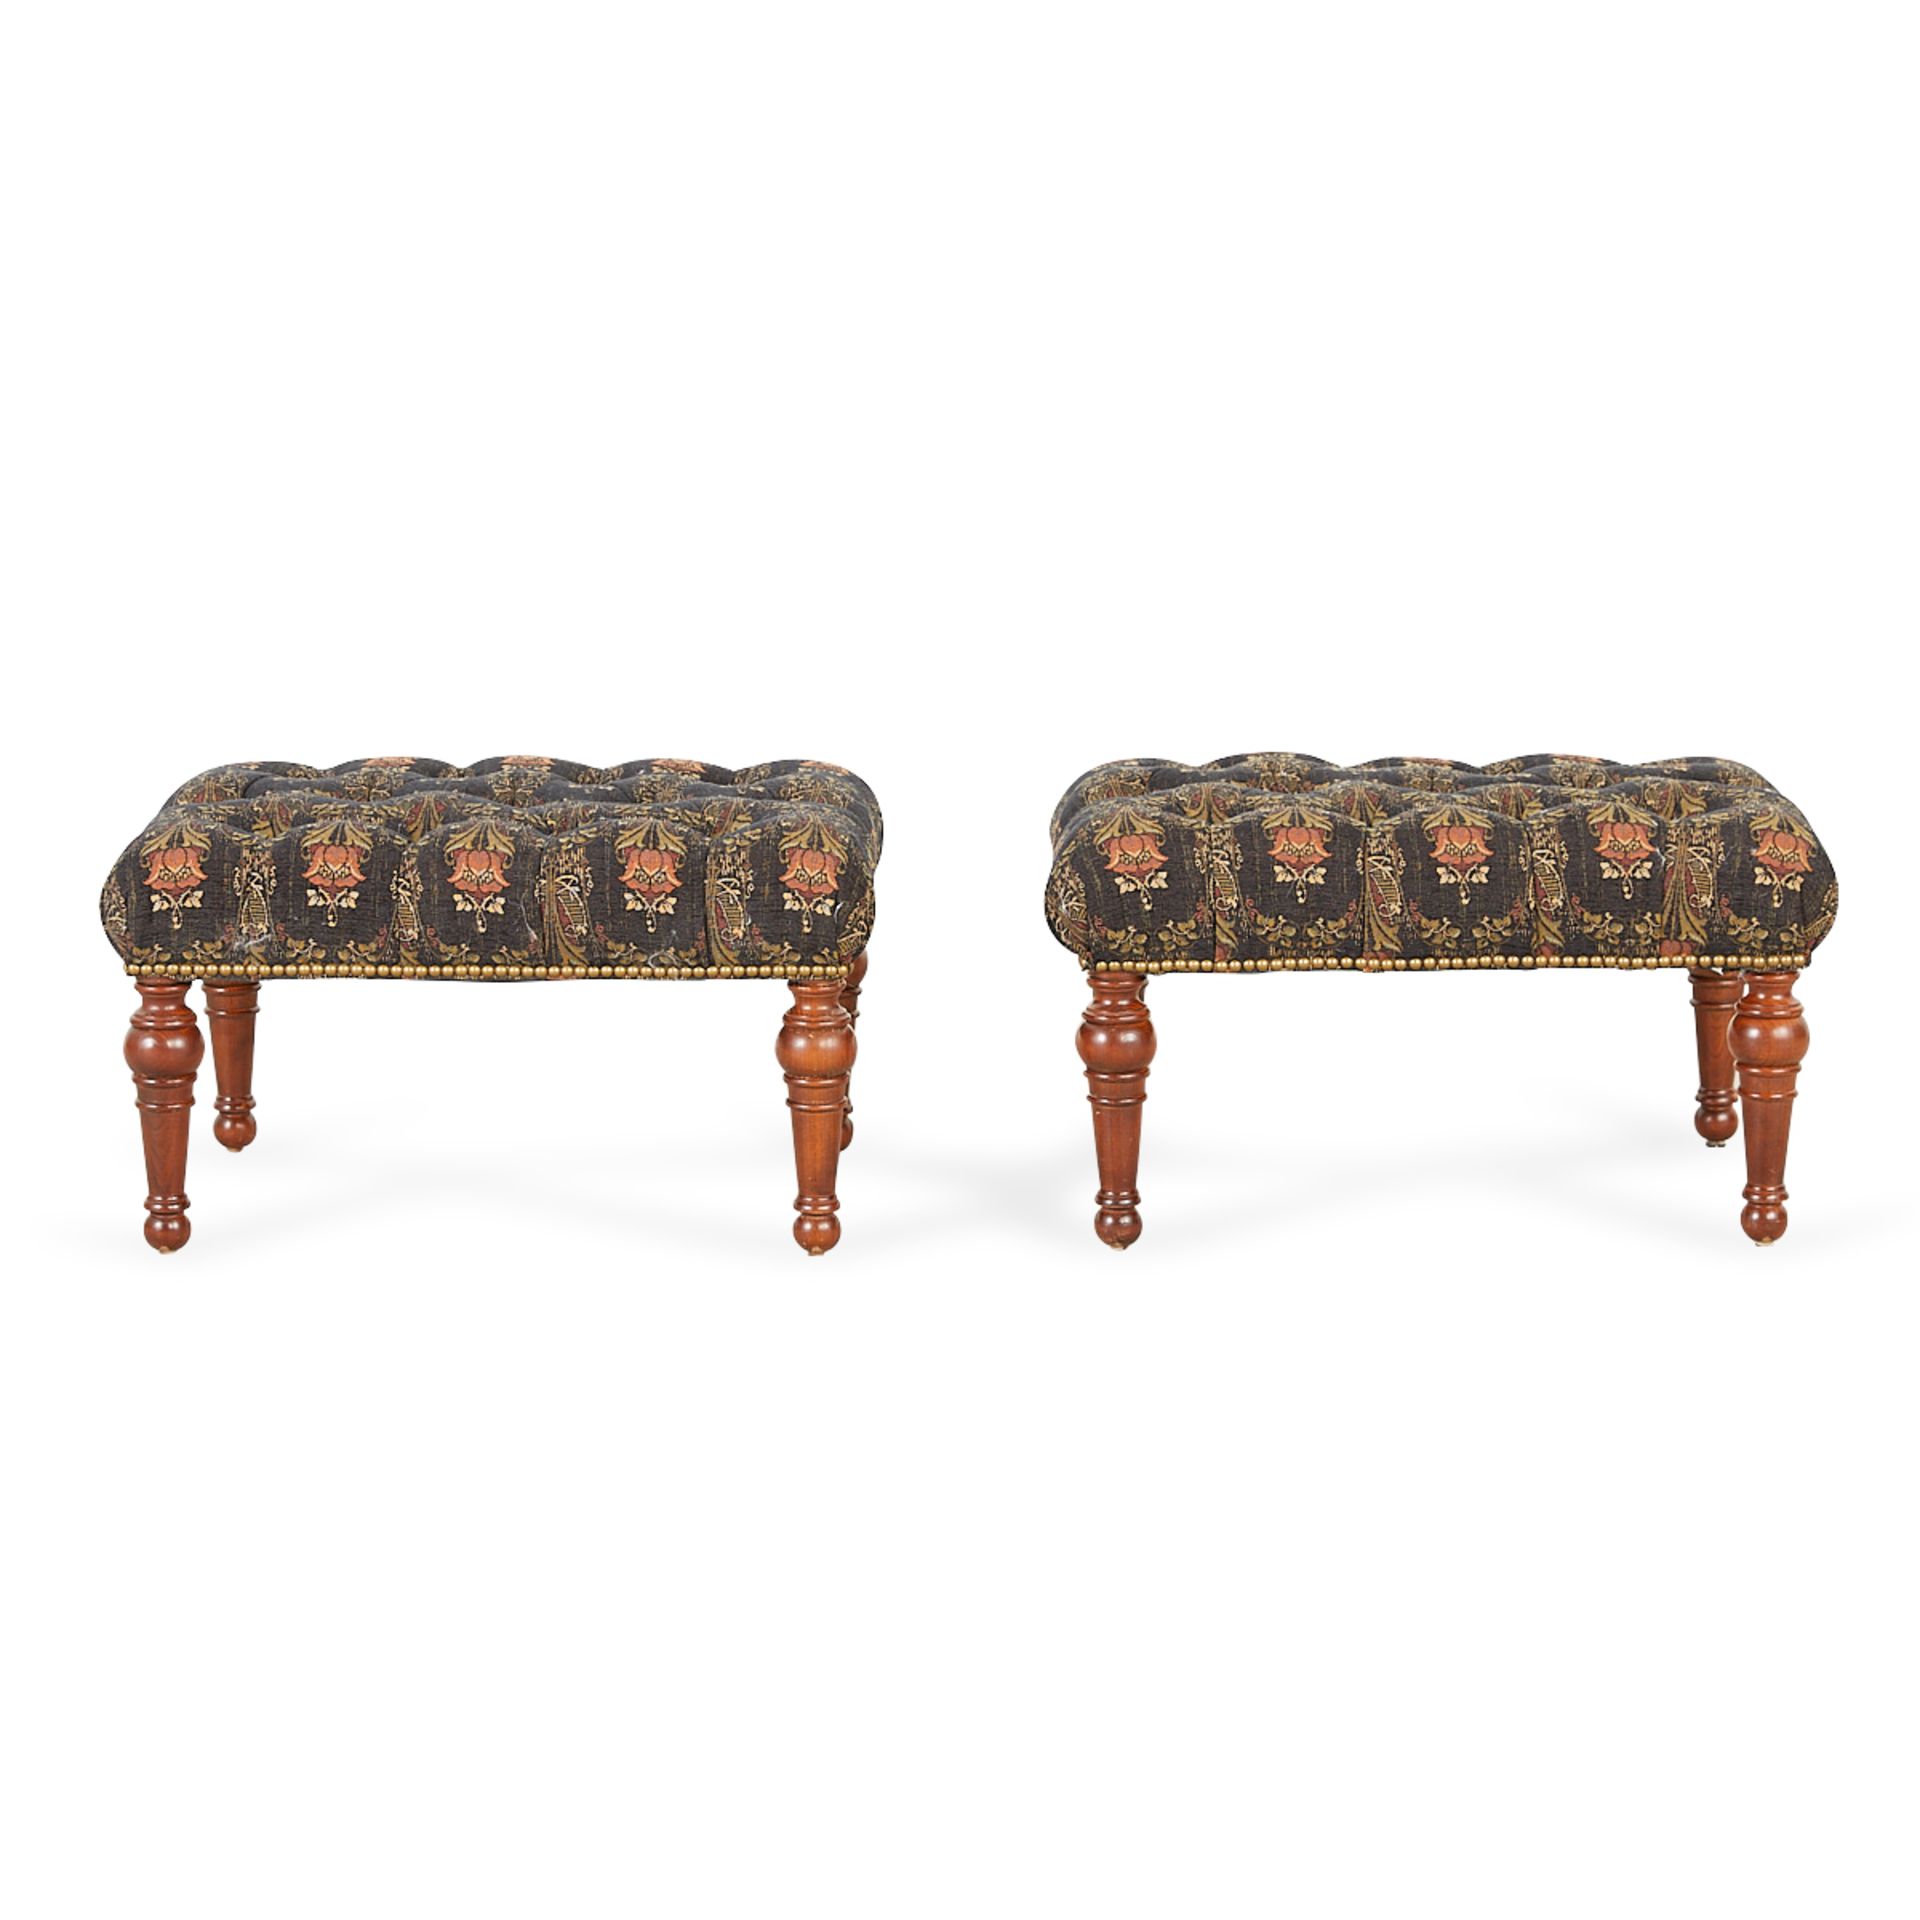 Pair of Stickley Tufted Chairs w/Ottomans - Image 17 of 22